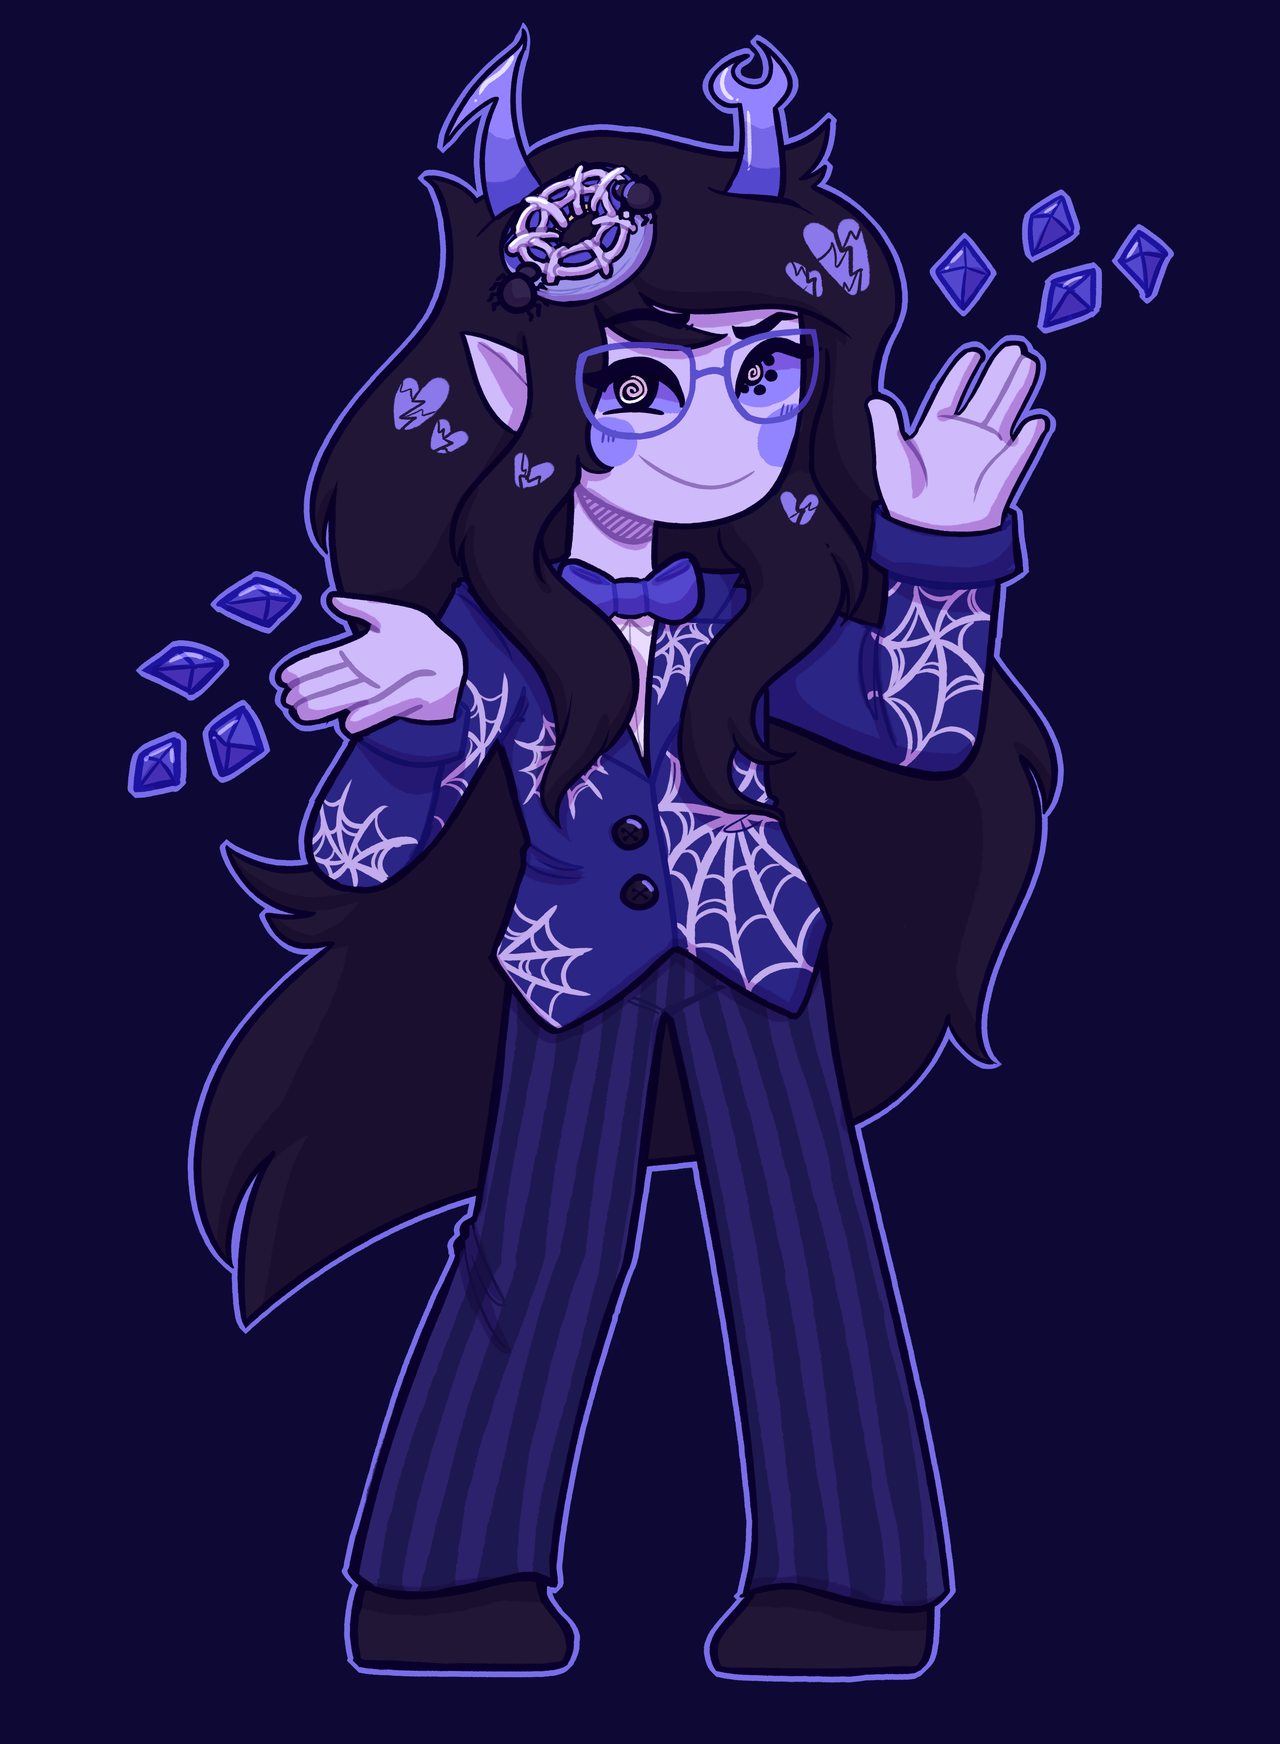 drawthiere:
“ i felt like drawing tricksters again so here’s a vriska, she’s a spider donut because Ha Ha Undertale
i’m dropping the artstyle i used for the trickster series because it’s pretty soul-crushing to draw in
”